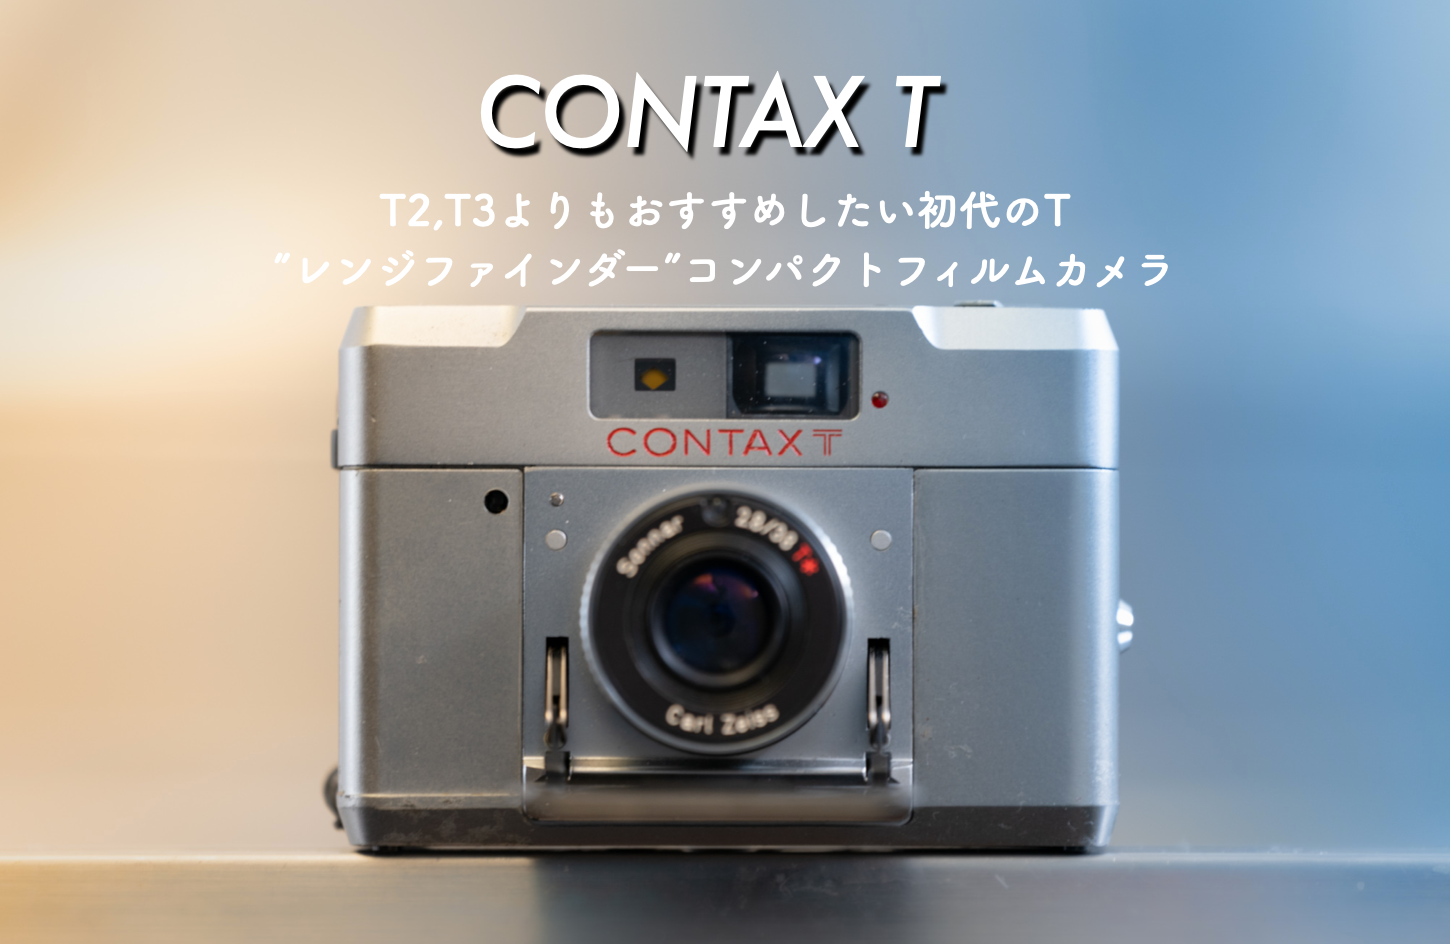 CONTAX T (初代)は隠れた銘”レンジファインダー”コンパクトフィルムカメラ。 from experience